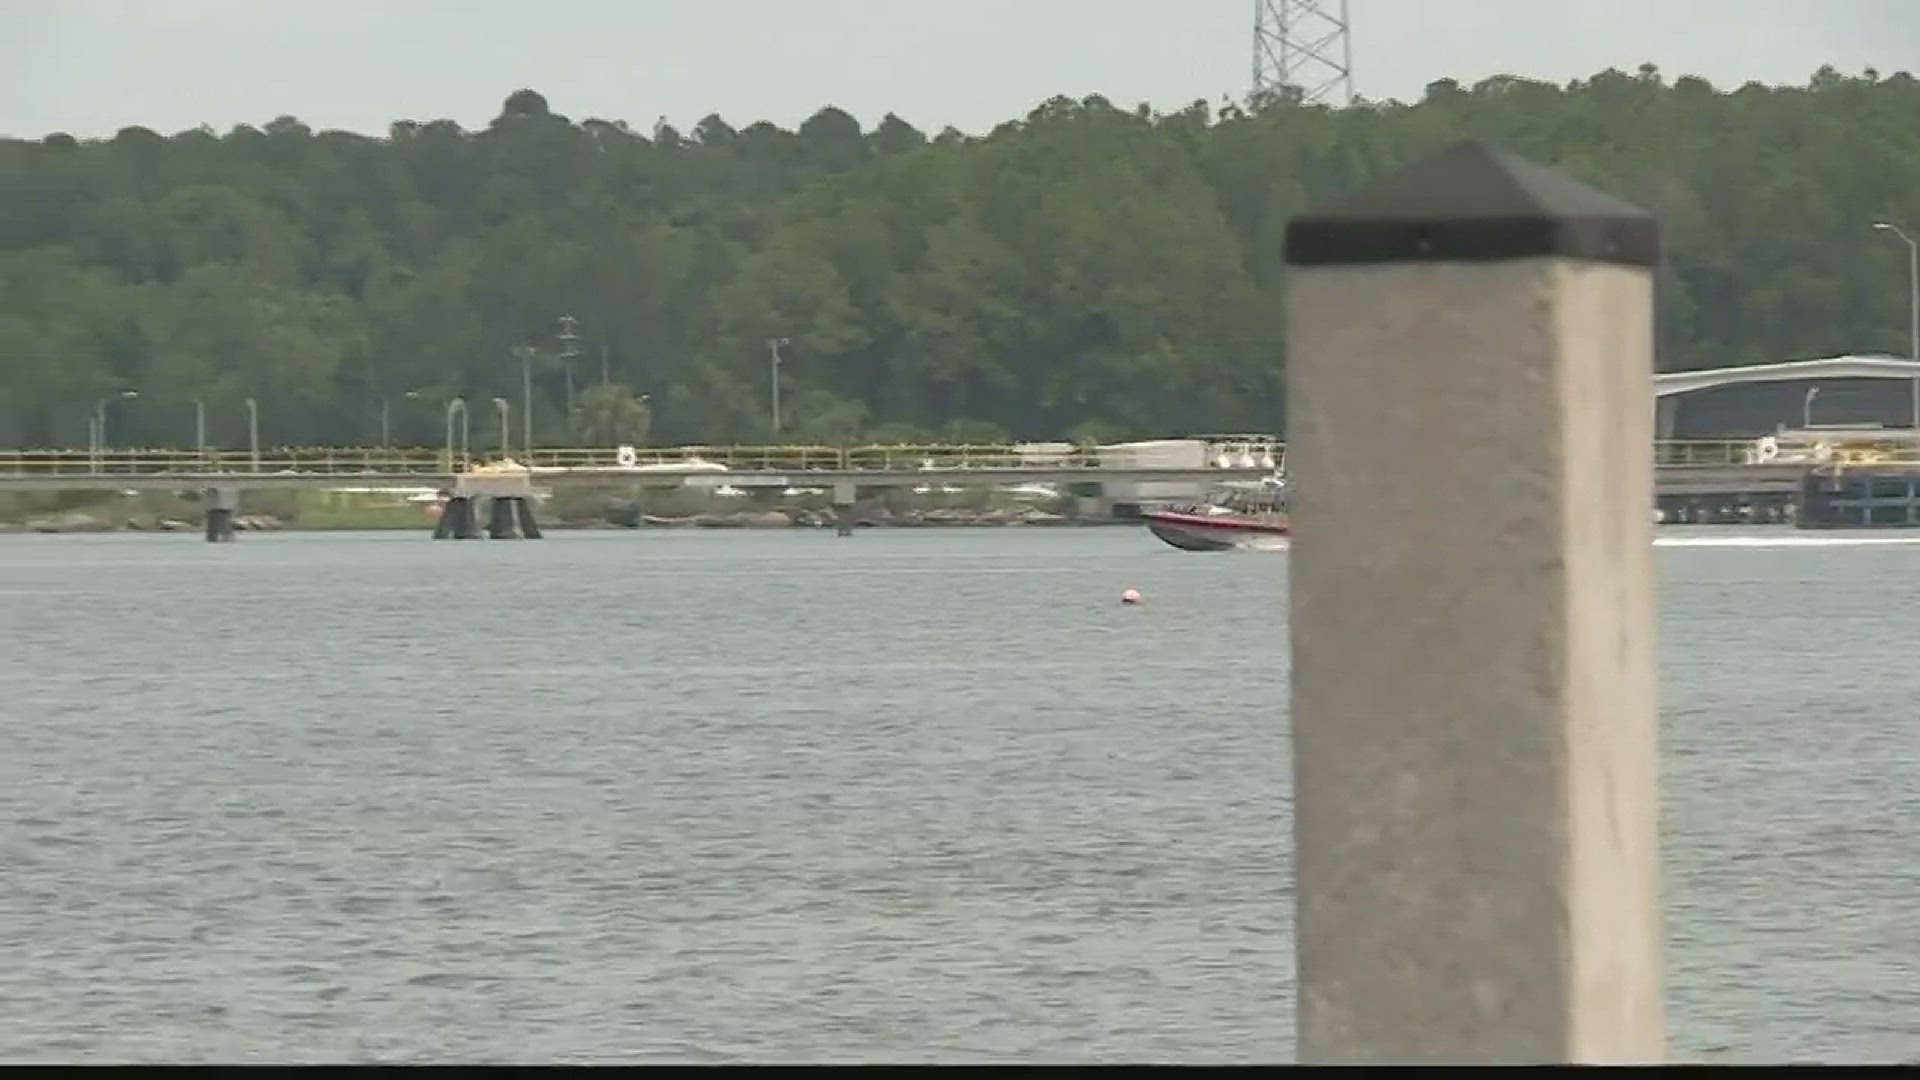 The Coast Guard has called off the search for a missing boater after the owner of the boat was found on land Friday.